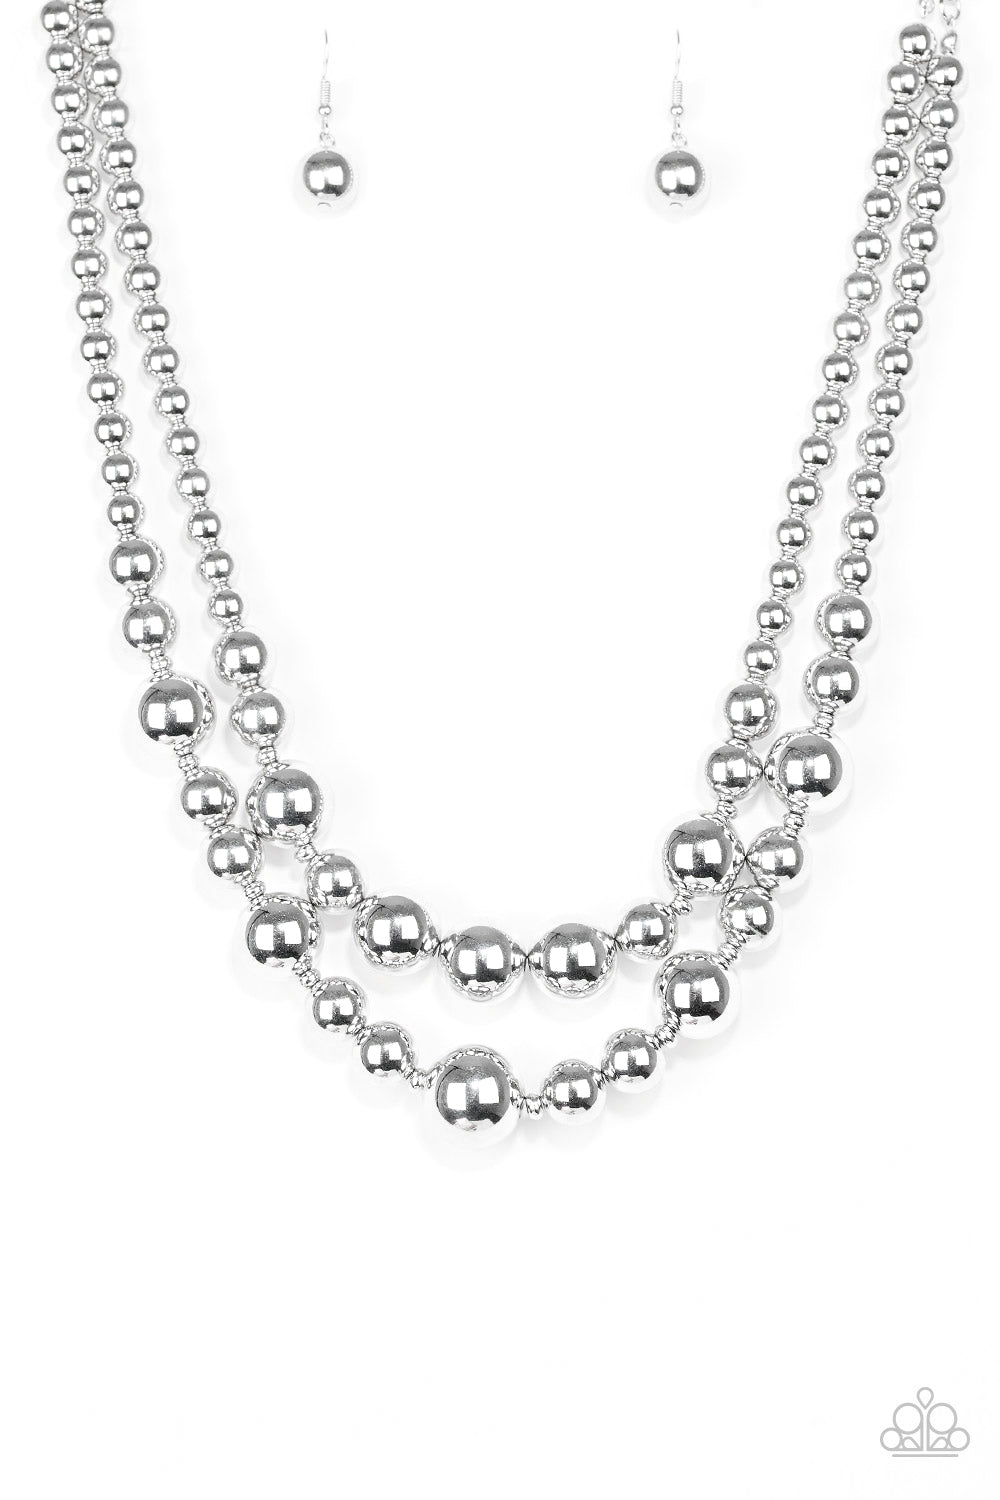 I Double Dare You - silver - Paparazzi necklace